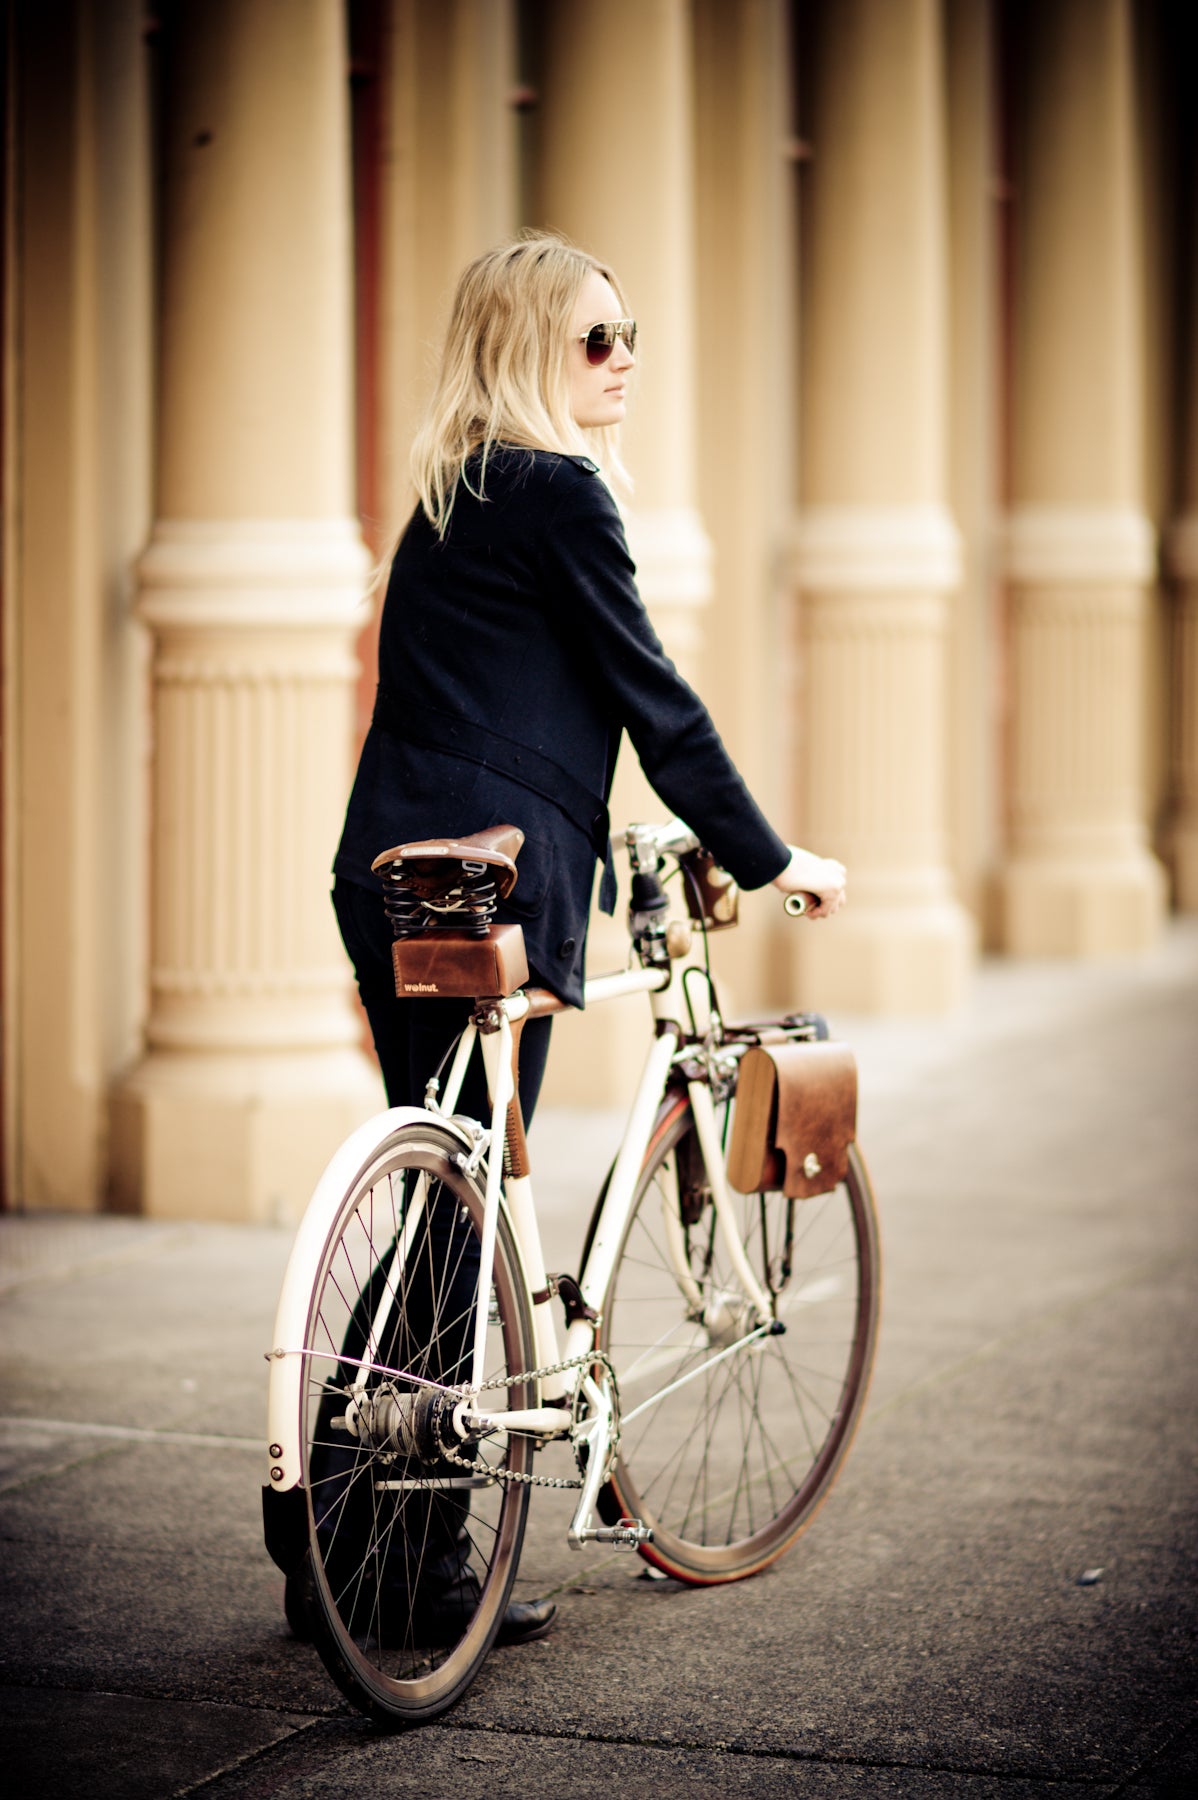 Top 5 Reasons Why More Women Should Start Bicycle Commuting